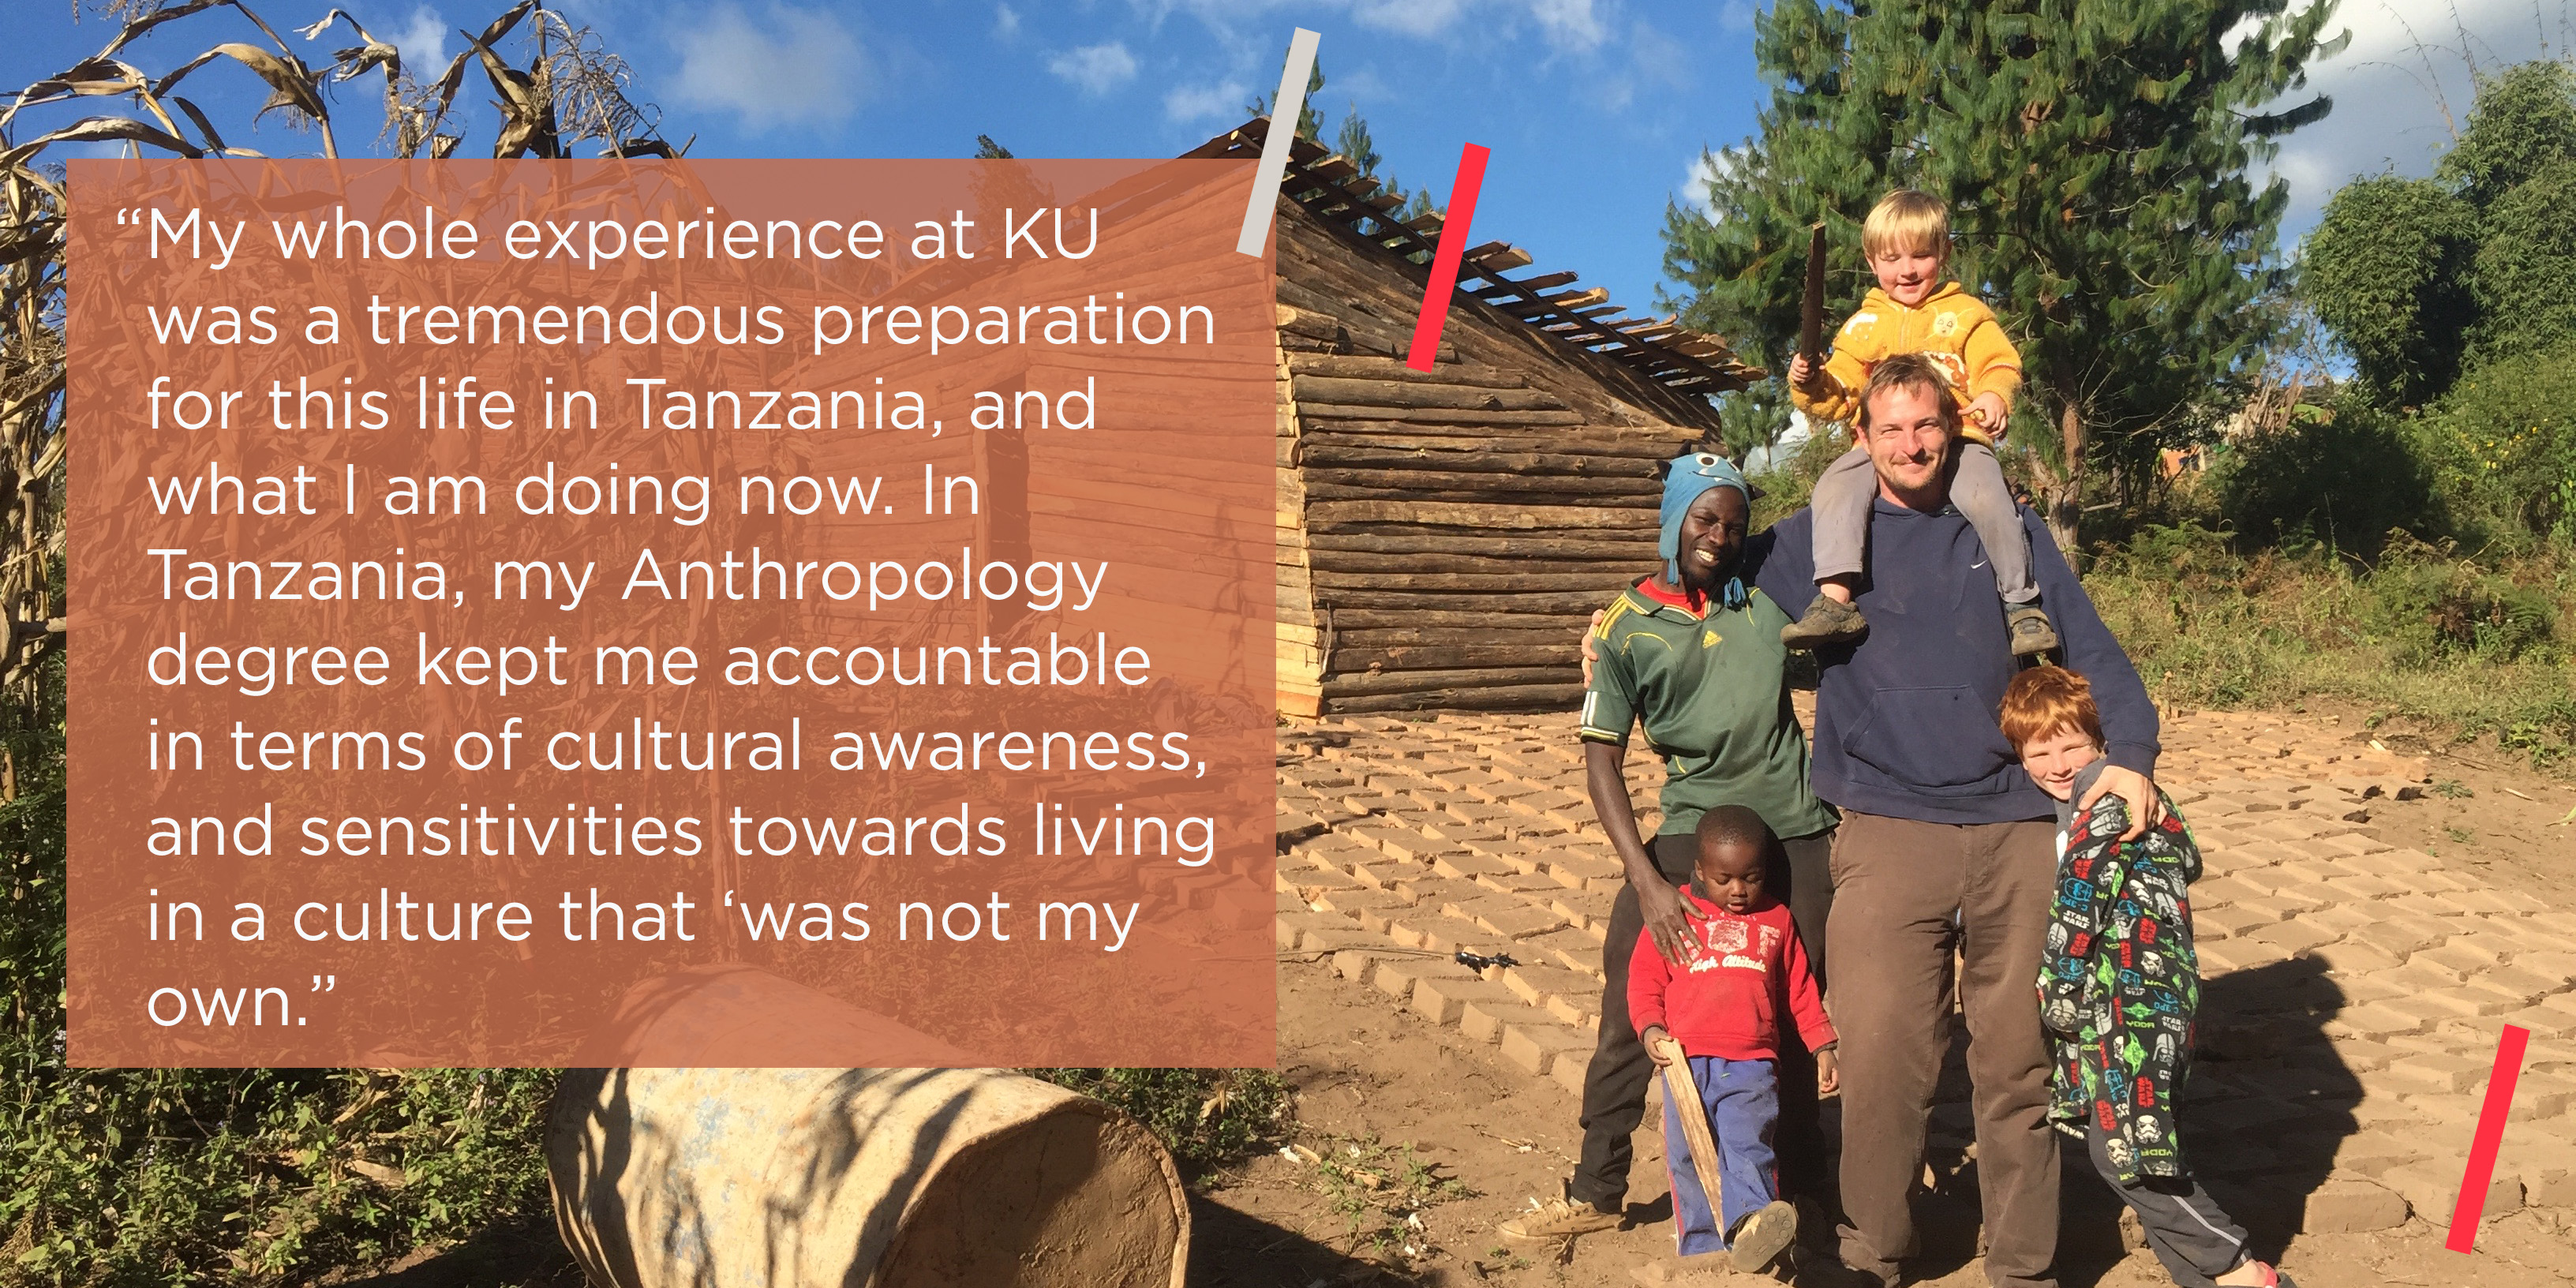 “My whole experience at KU was a tremendous preparation for this life in Tanzania, and what I am doing now. In Tanzania, my Anthropology degree kept me accountable in terms of cultural awareness, and sensitivities towards living in a culture that ‘was not my own.” 